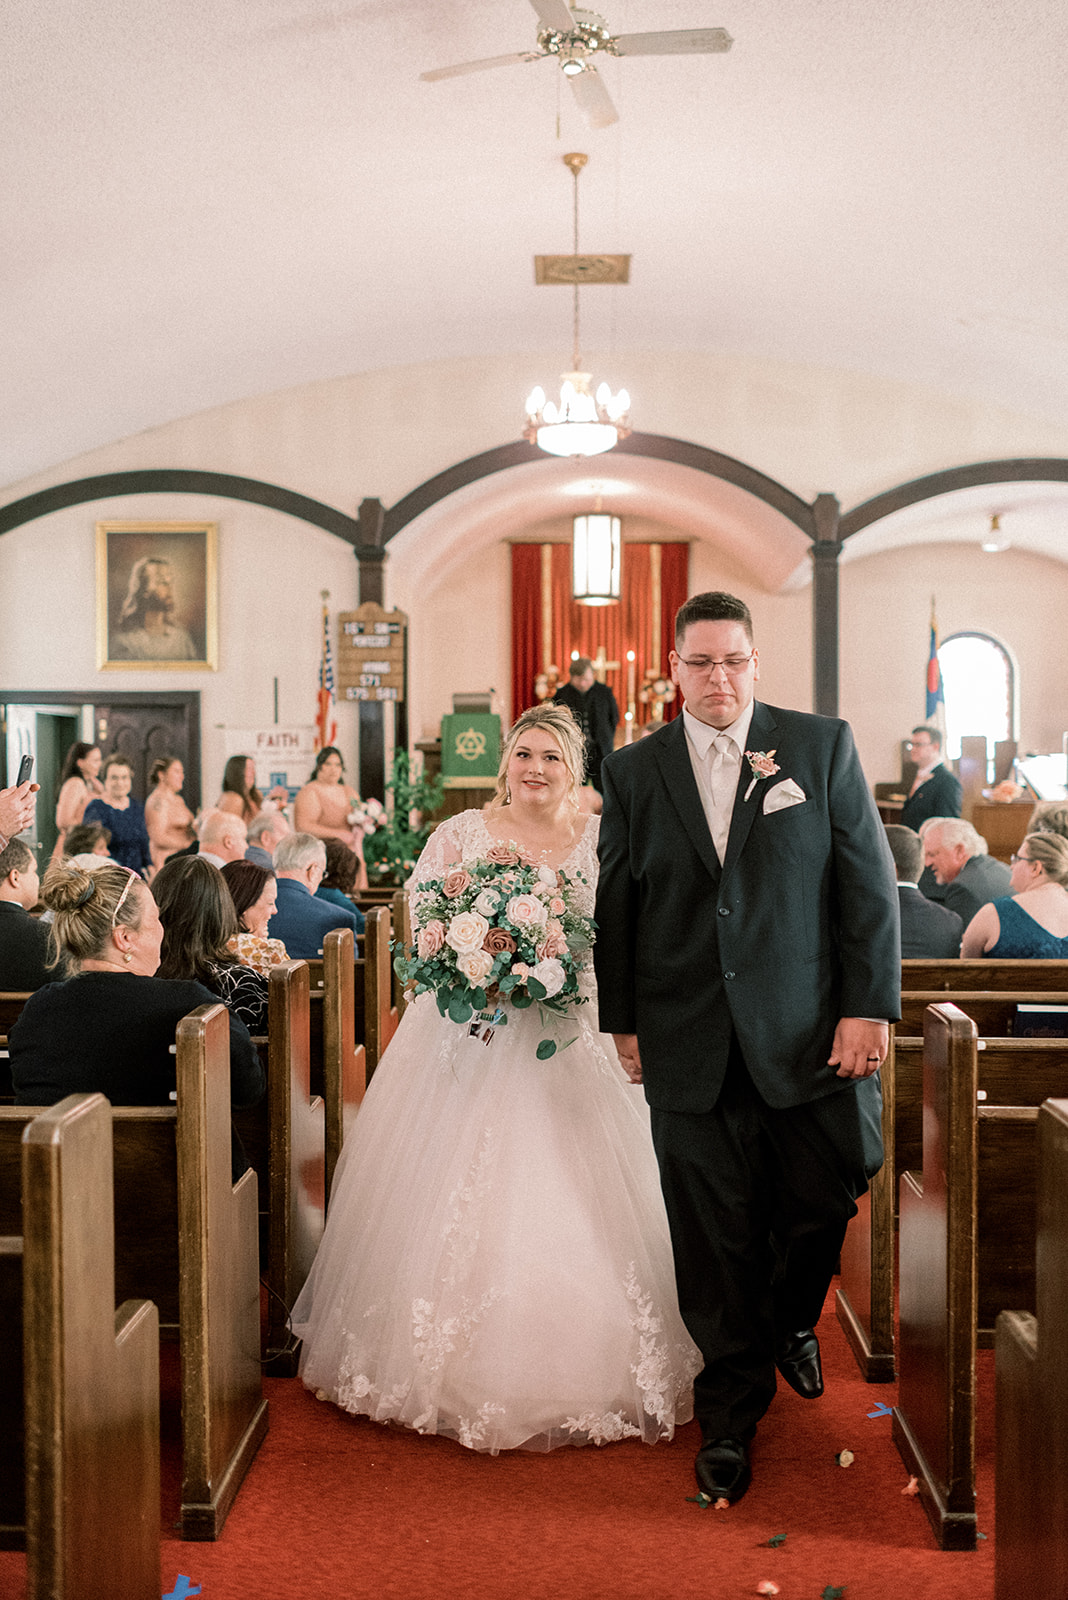 Pennsylvania wedding photographer captures bride and groom walking out of church as newly married husband and wife